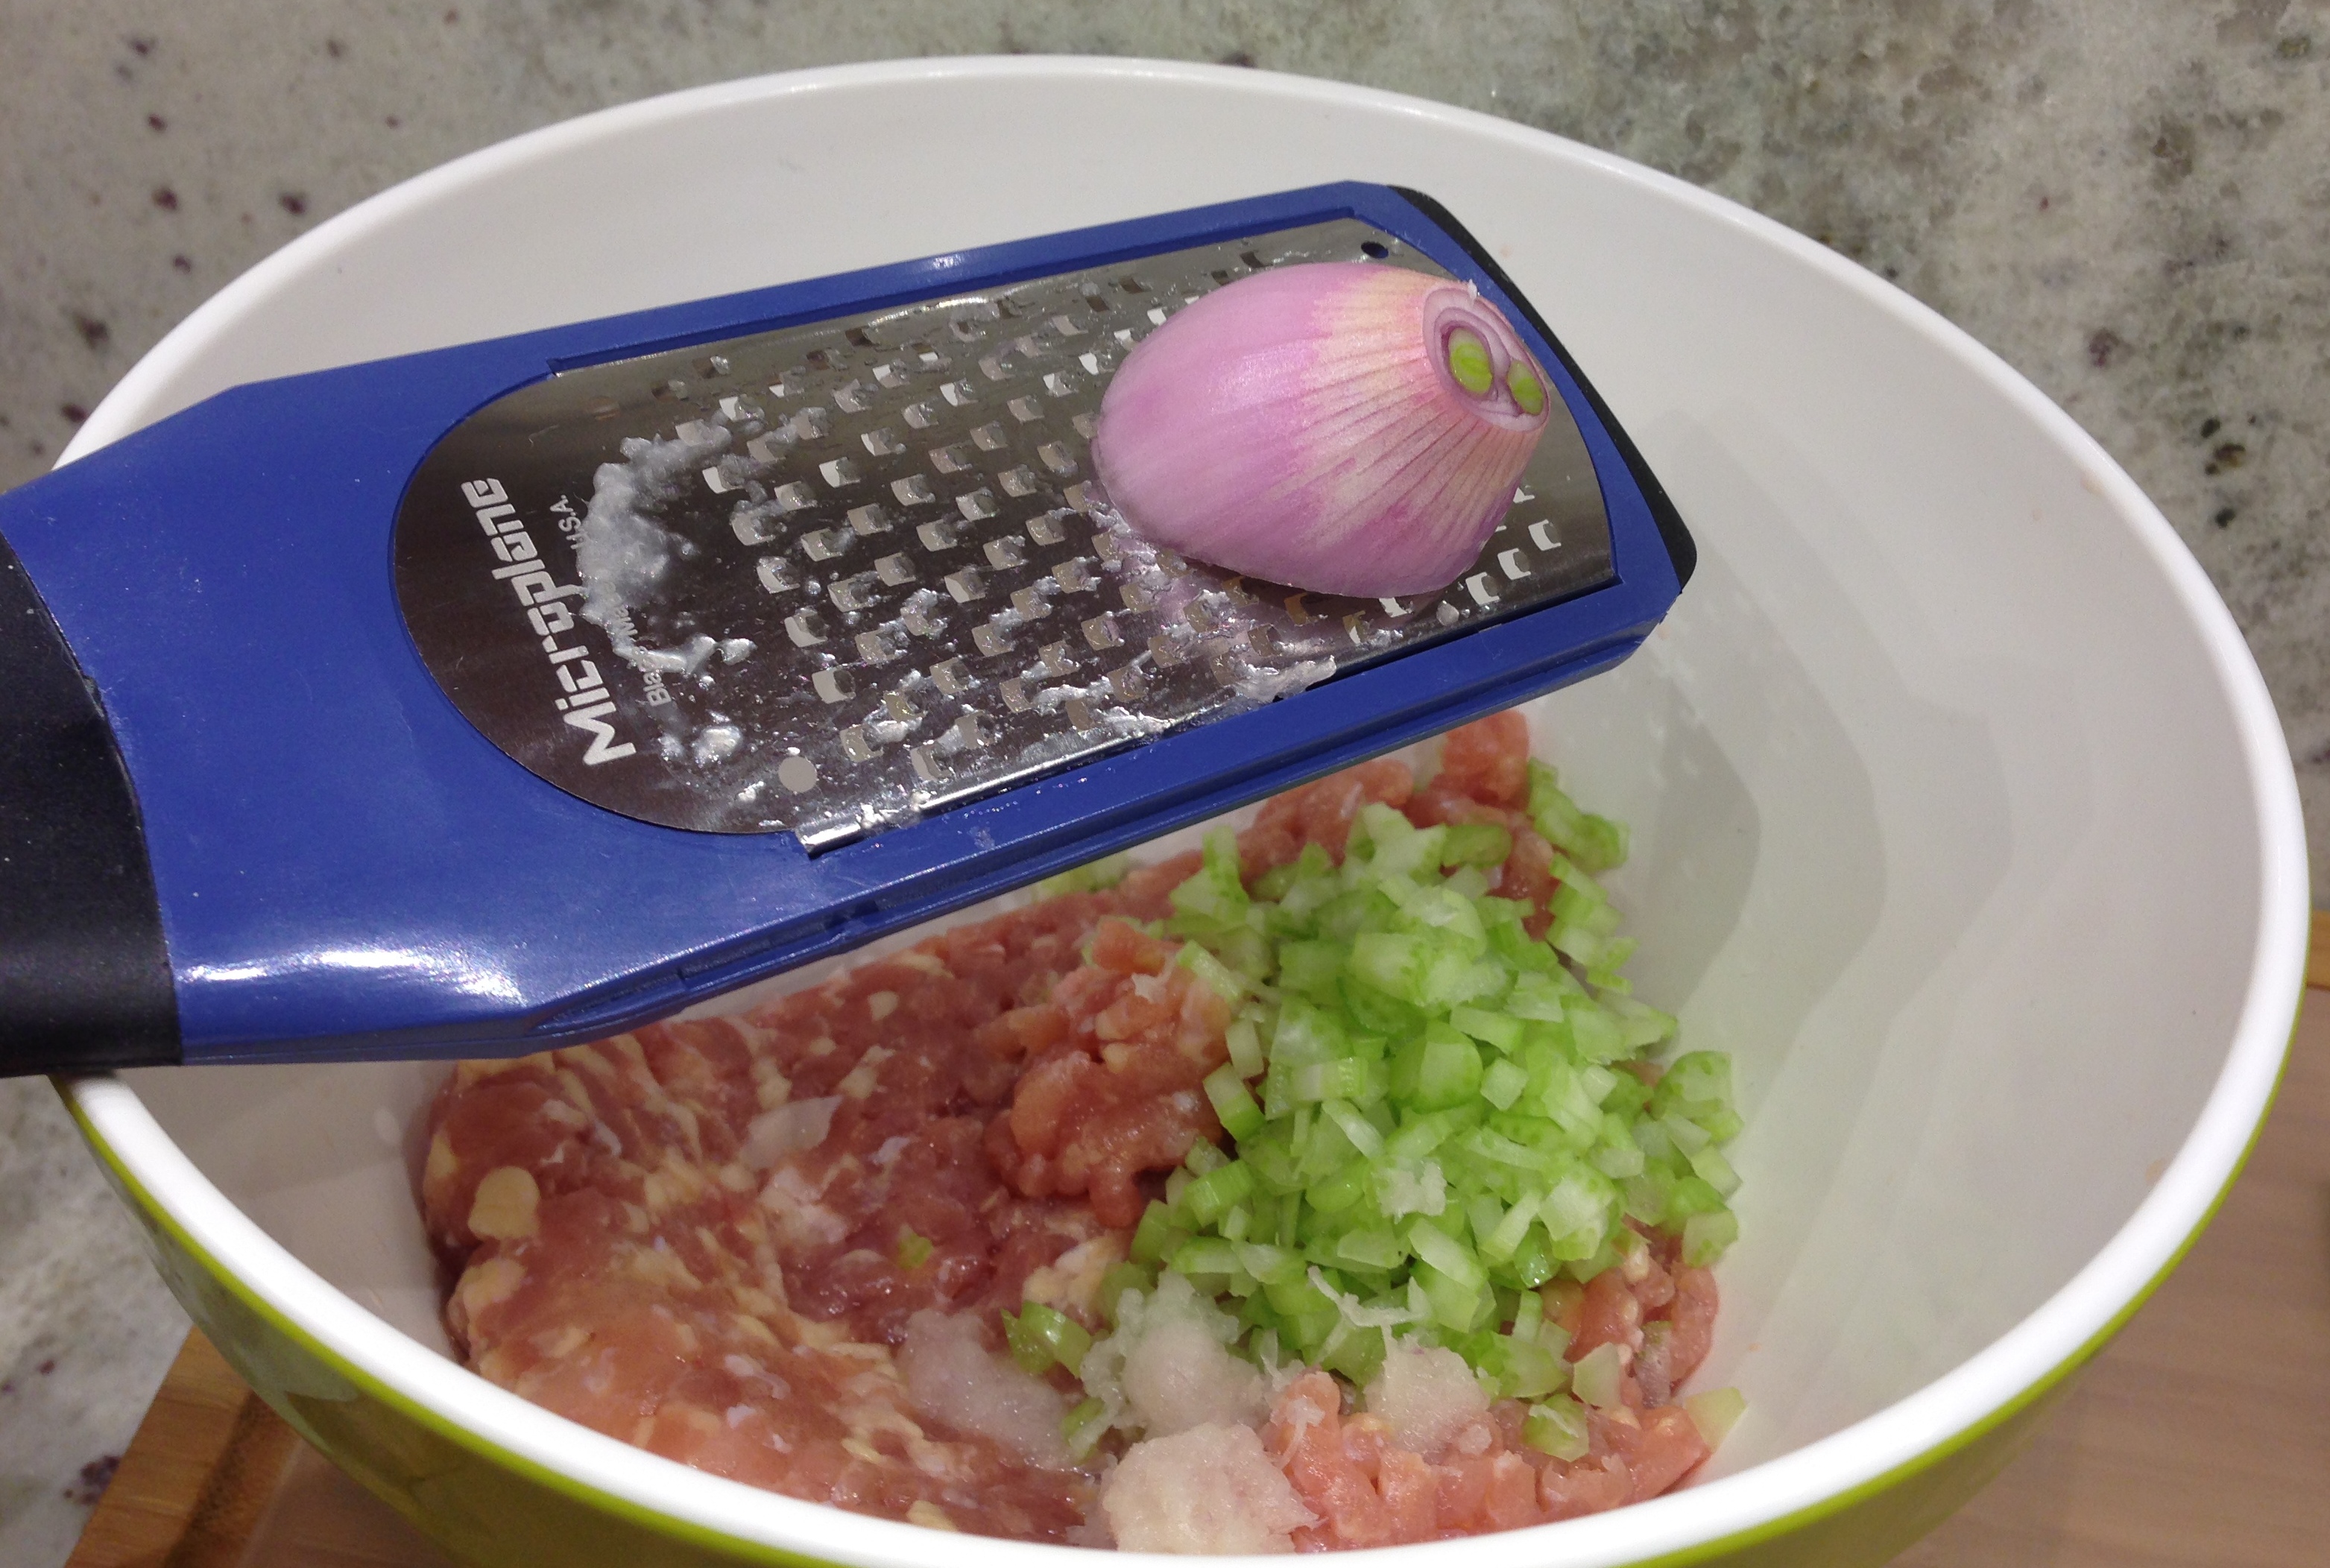 Grate the onion and garlic